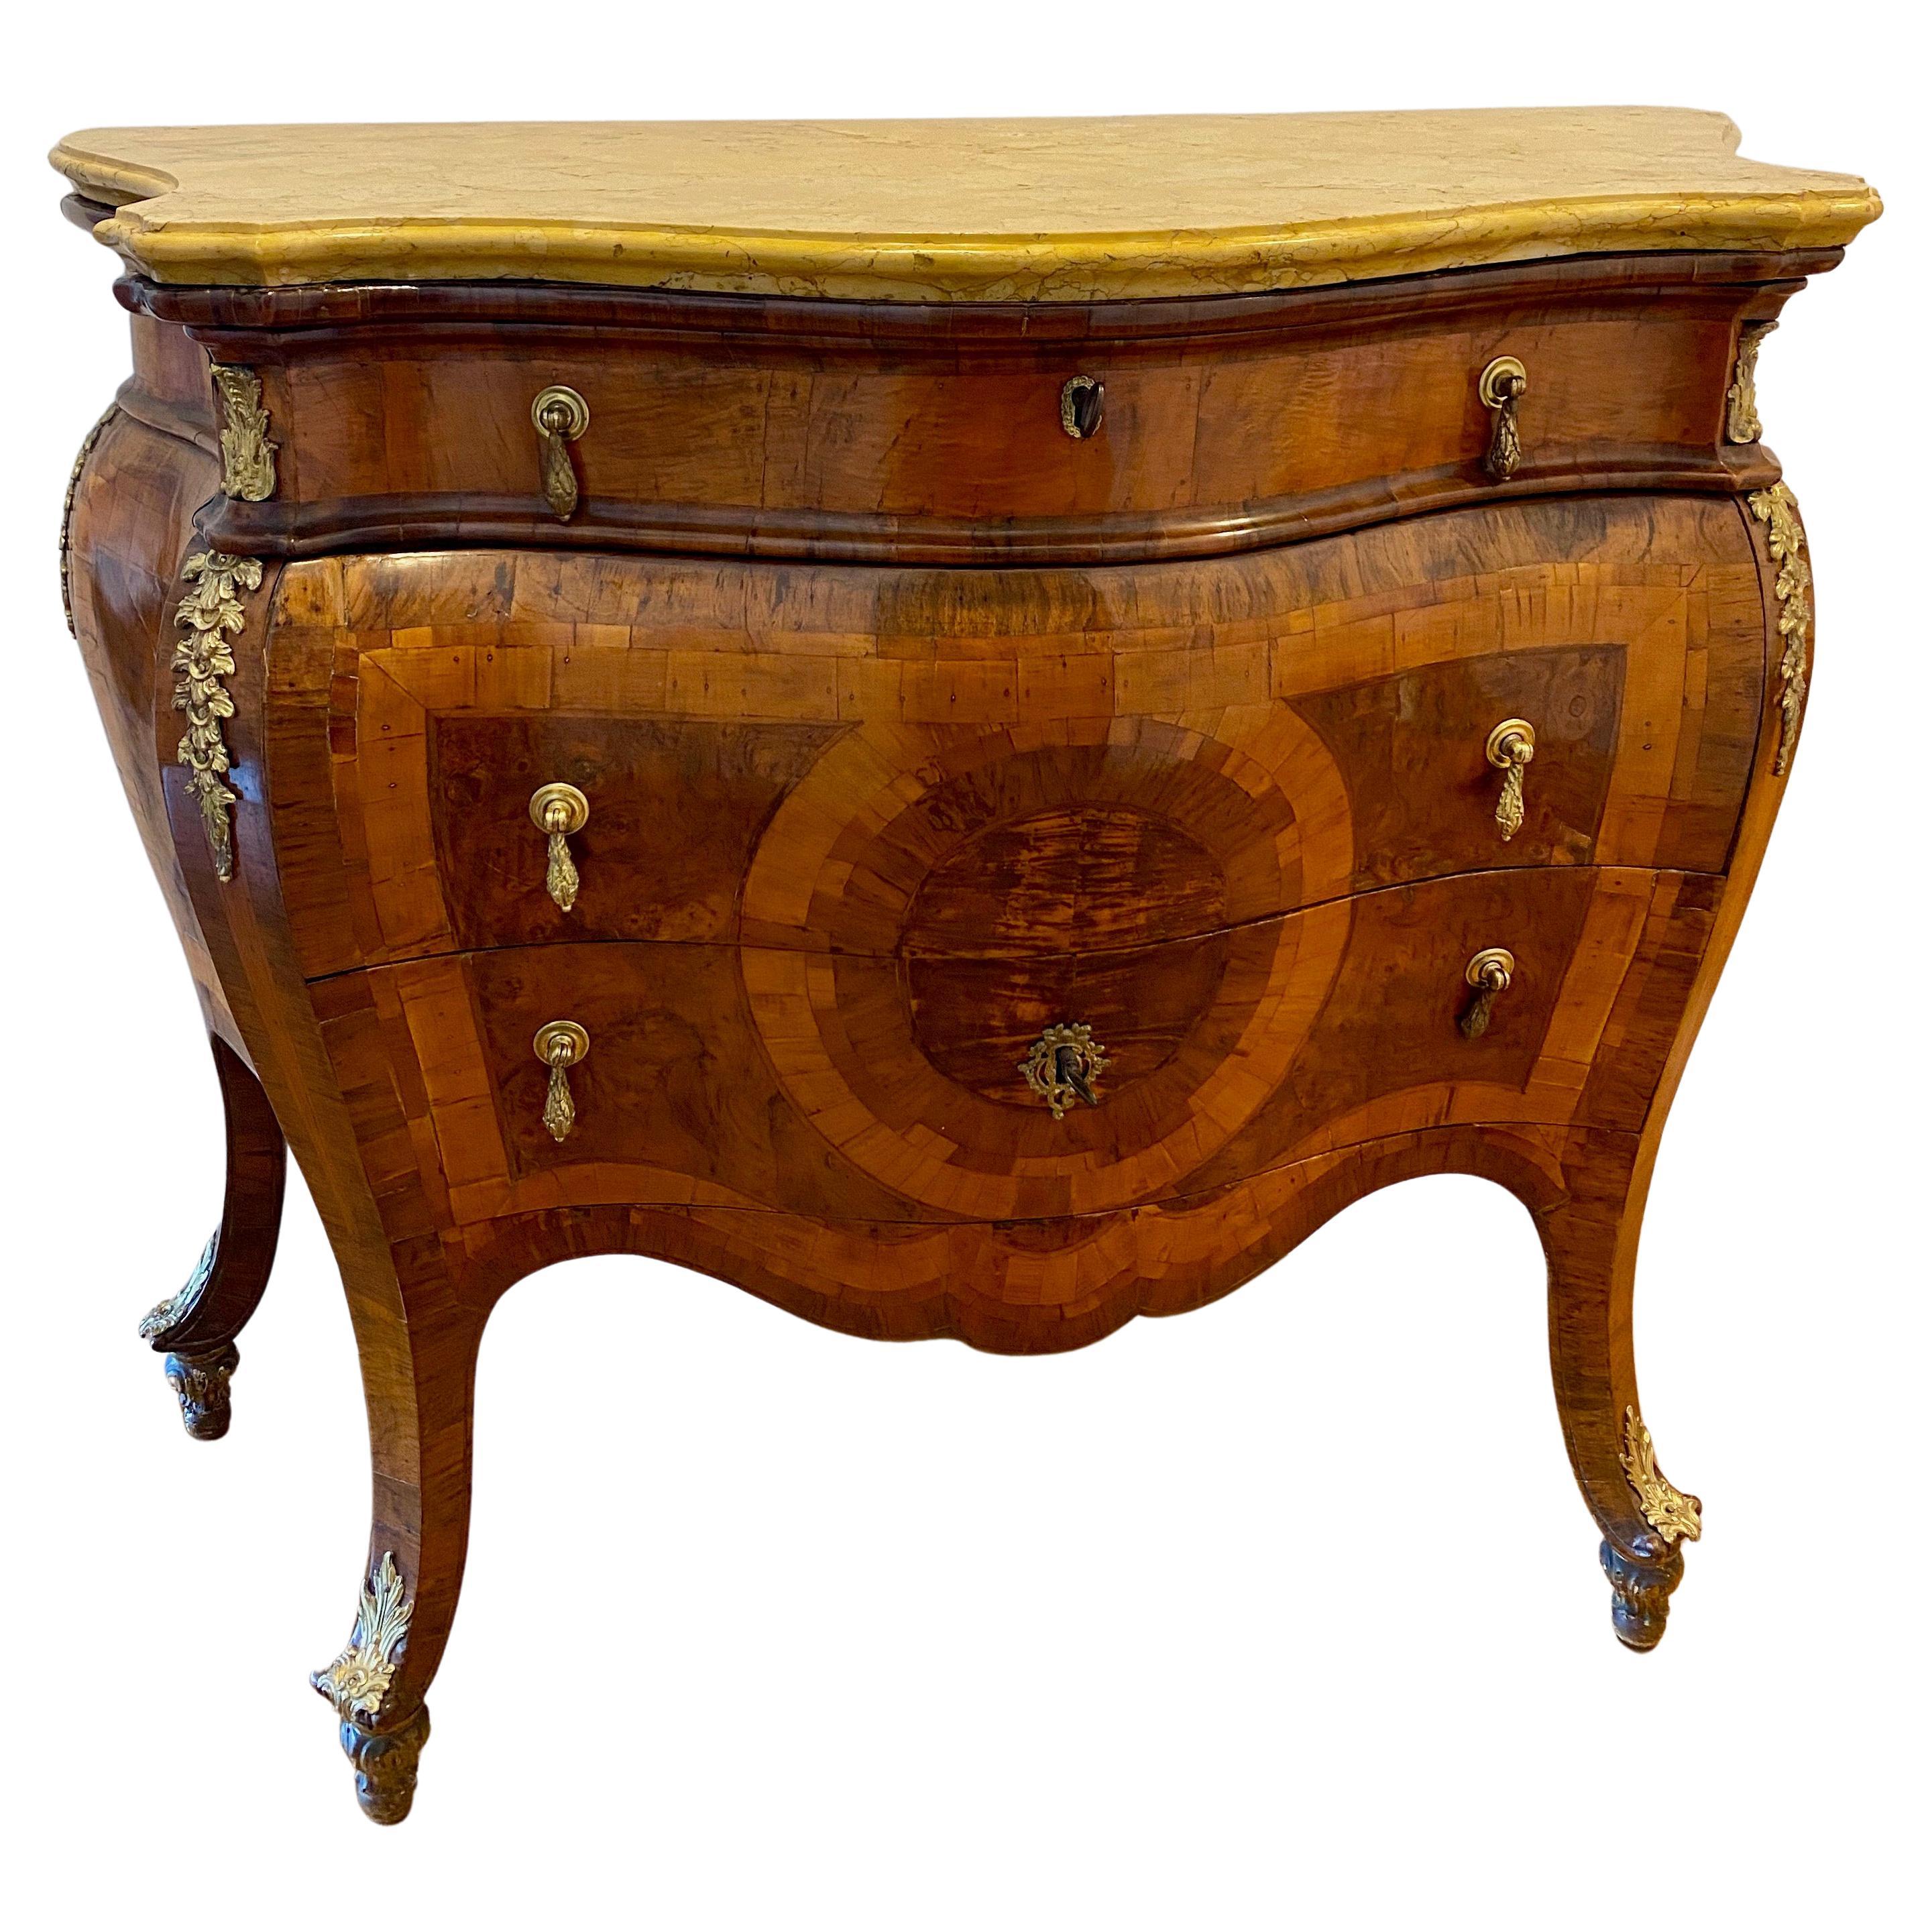 Italian Louis XV Roman Bombe' Shaped Commode with Original Marble Top, 1730